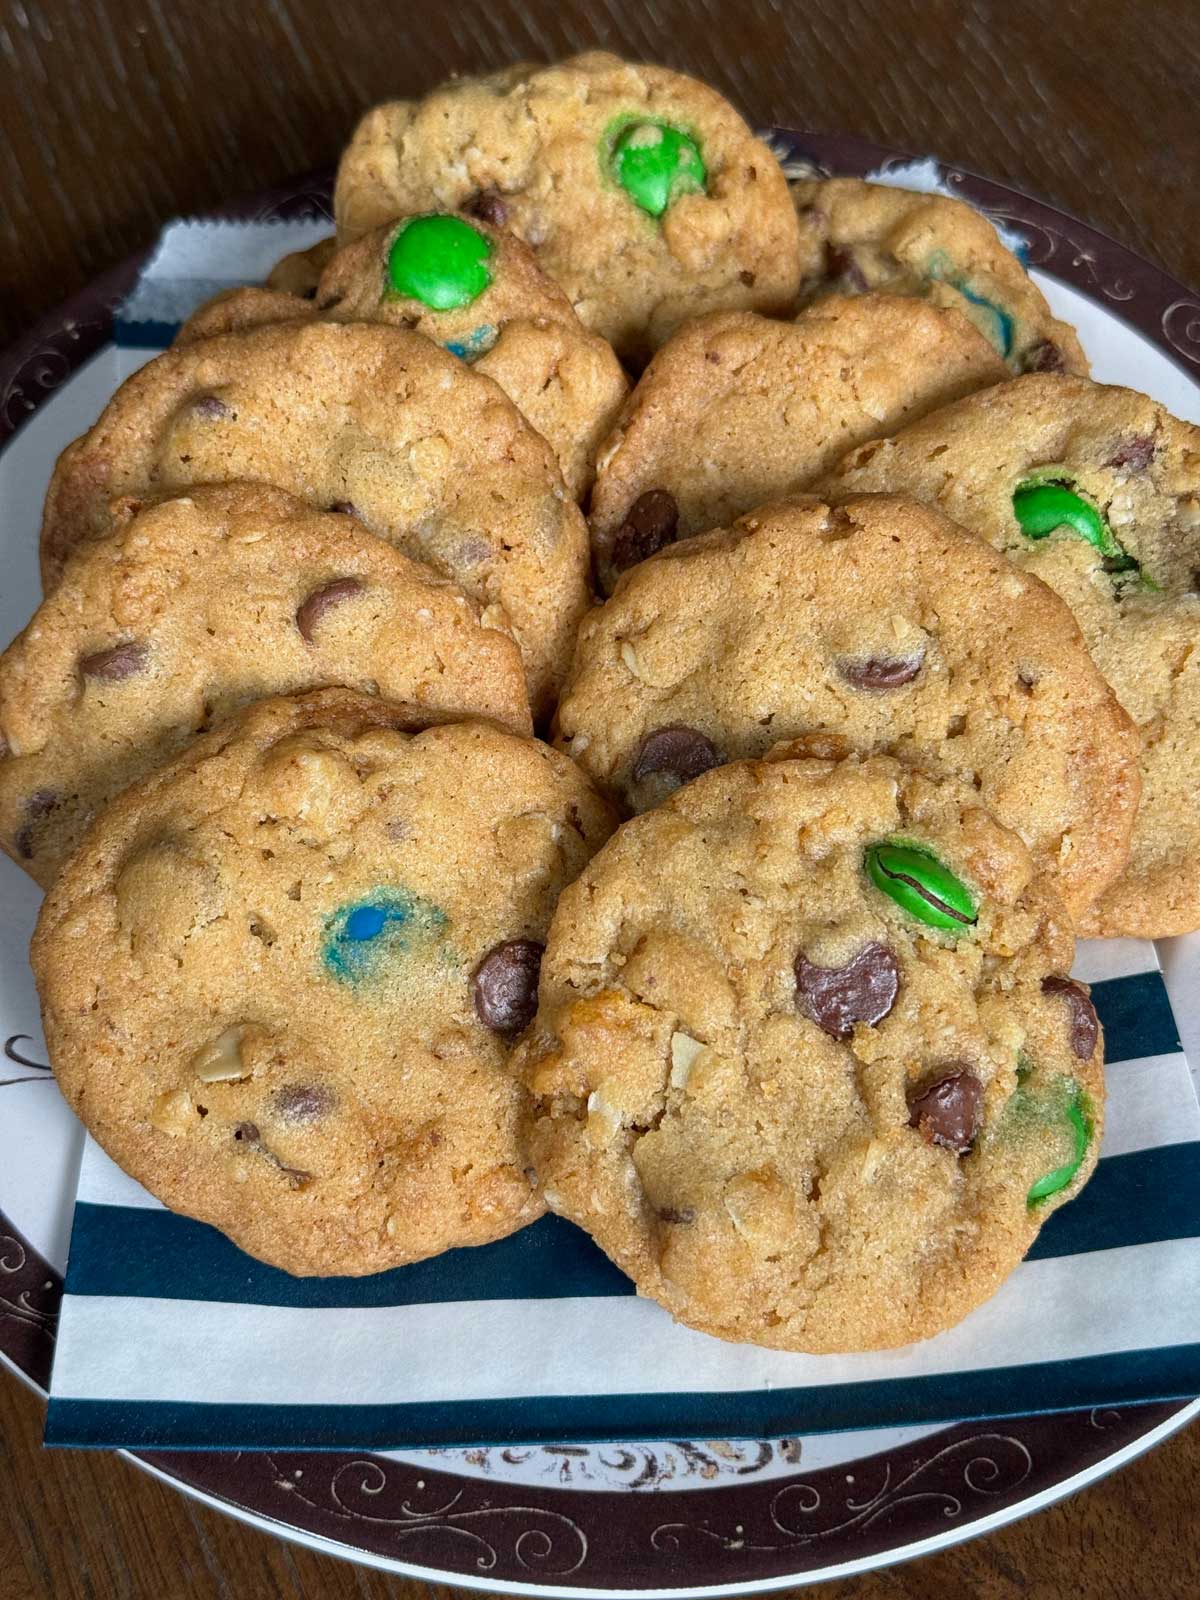 Chicago Crunchy Cookies or M&Ms Cookies